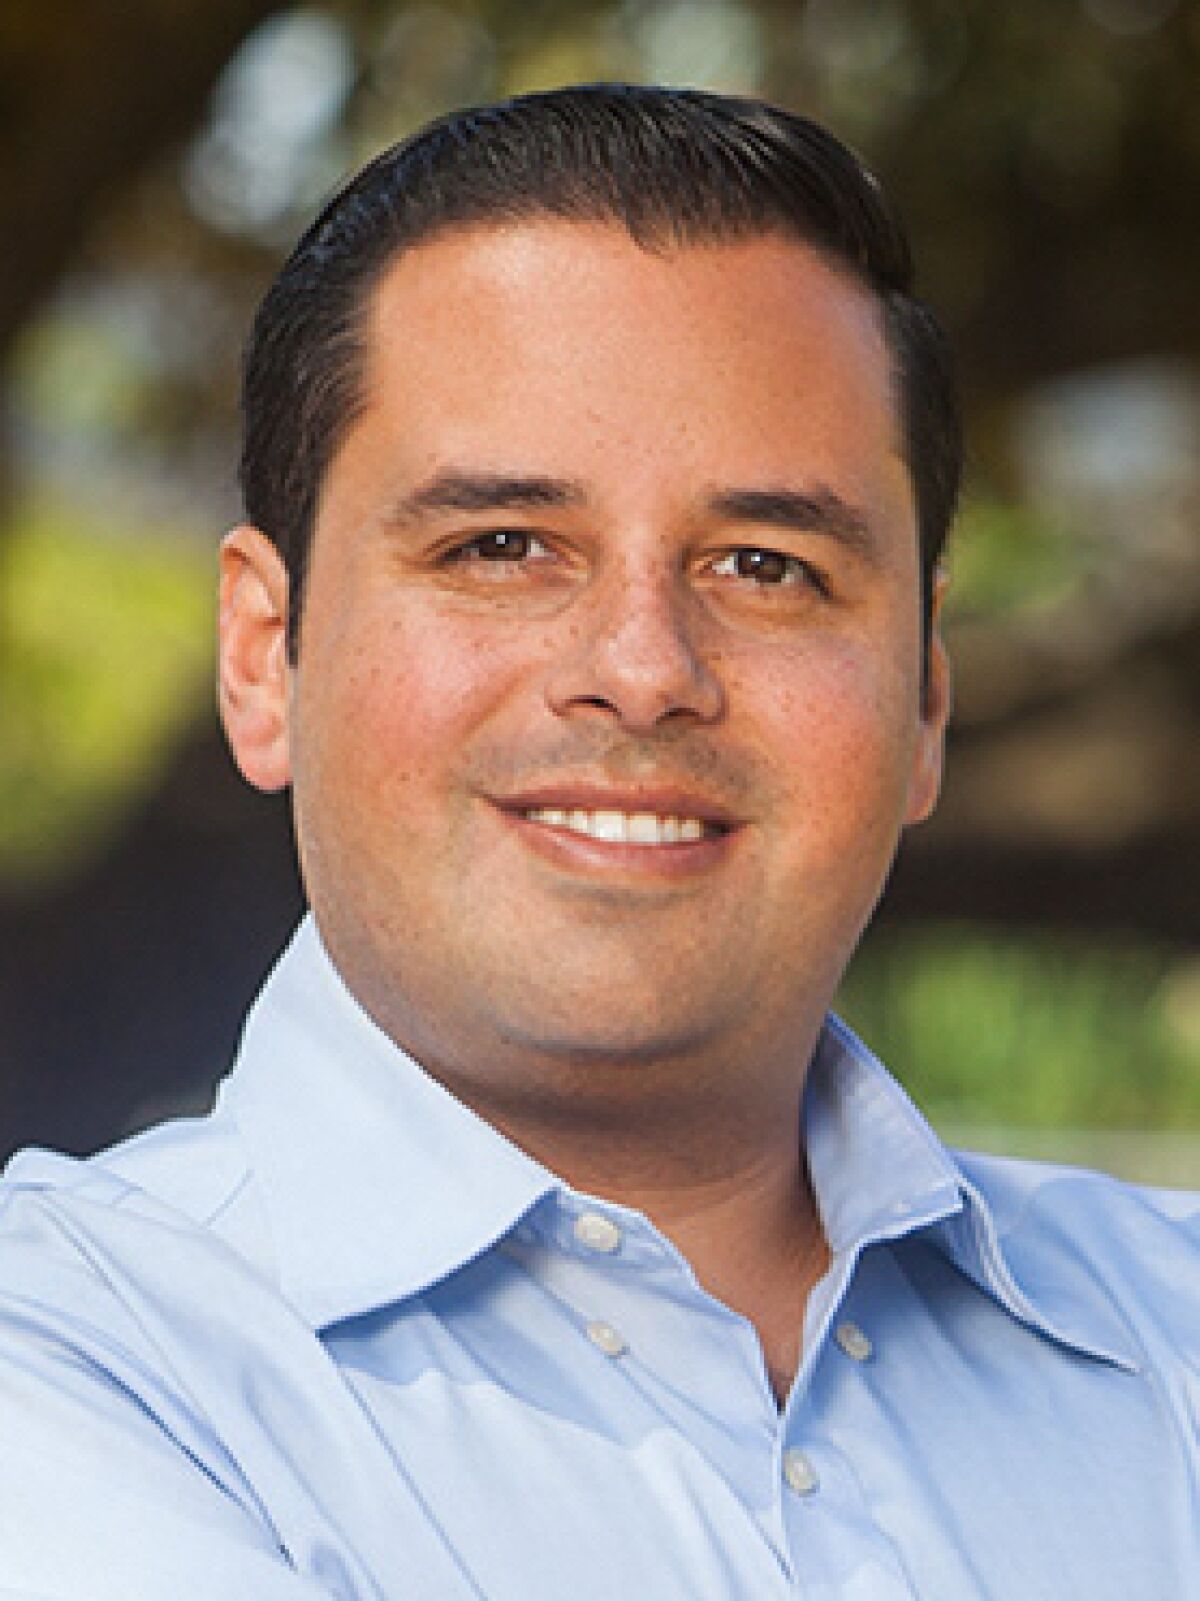 Antonio Martinez is running to represent San Diego City Council District 8.